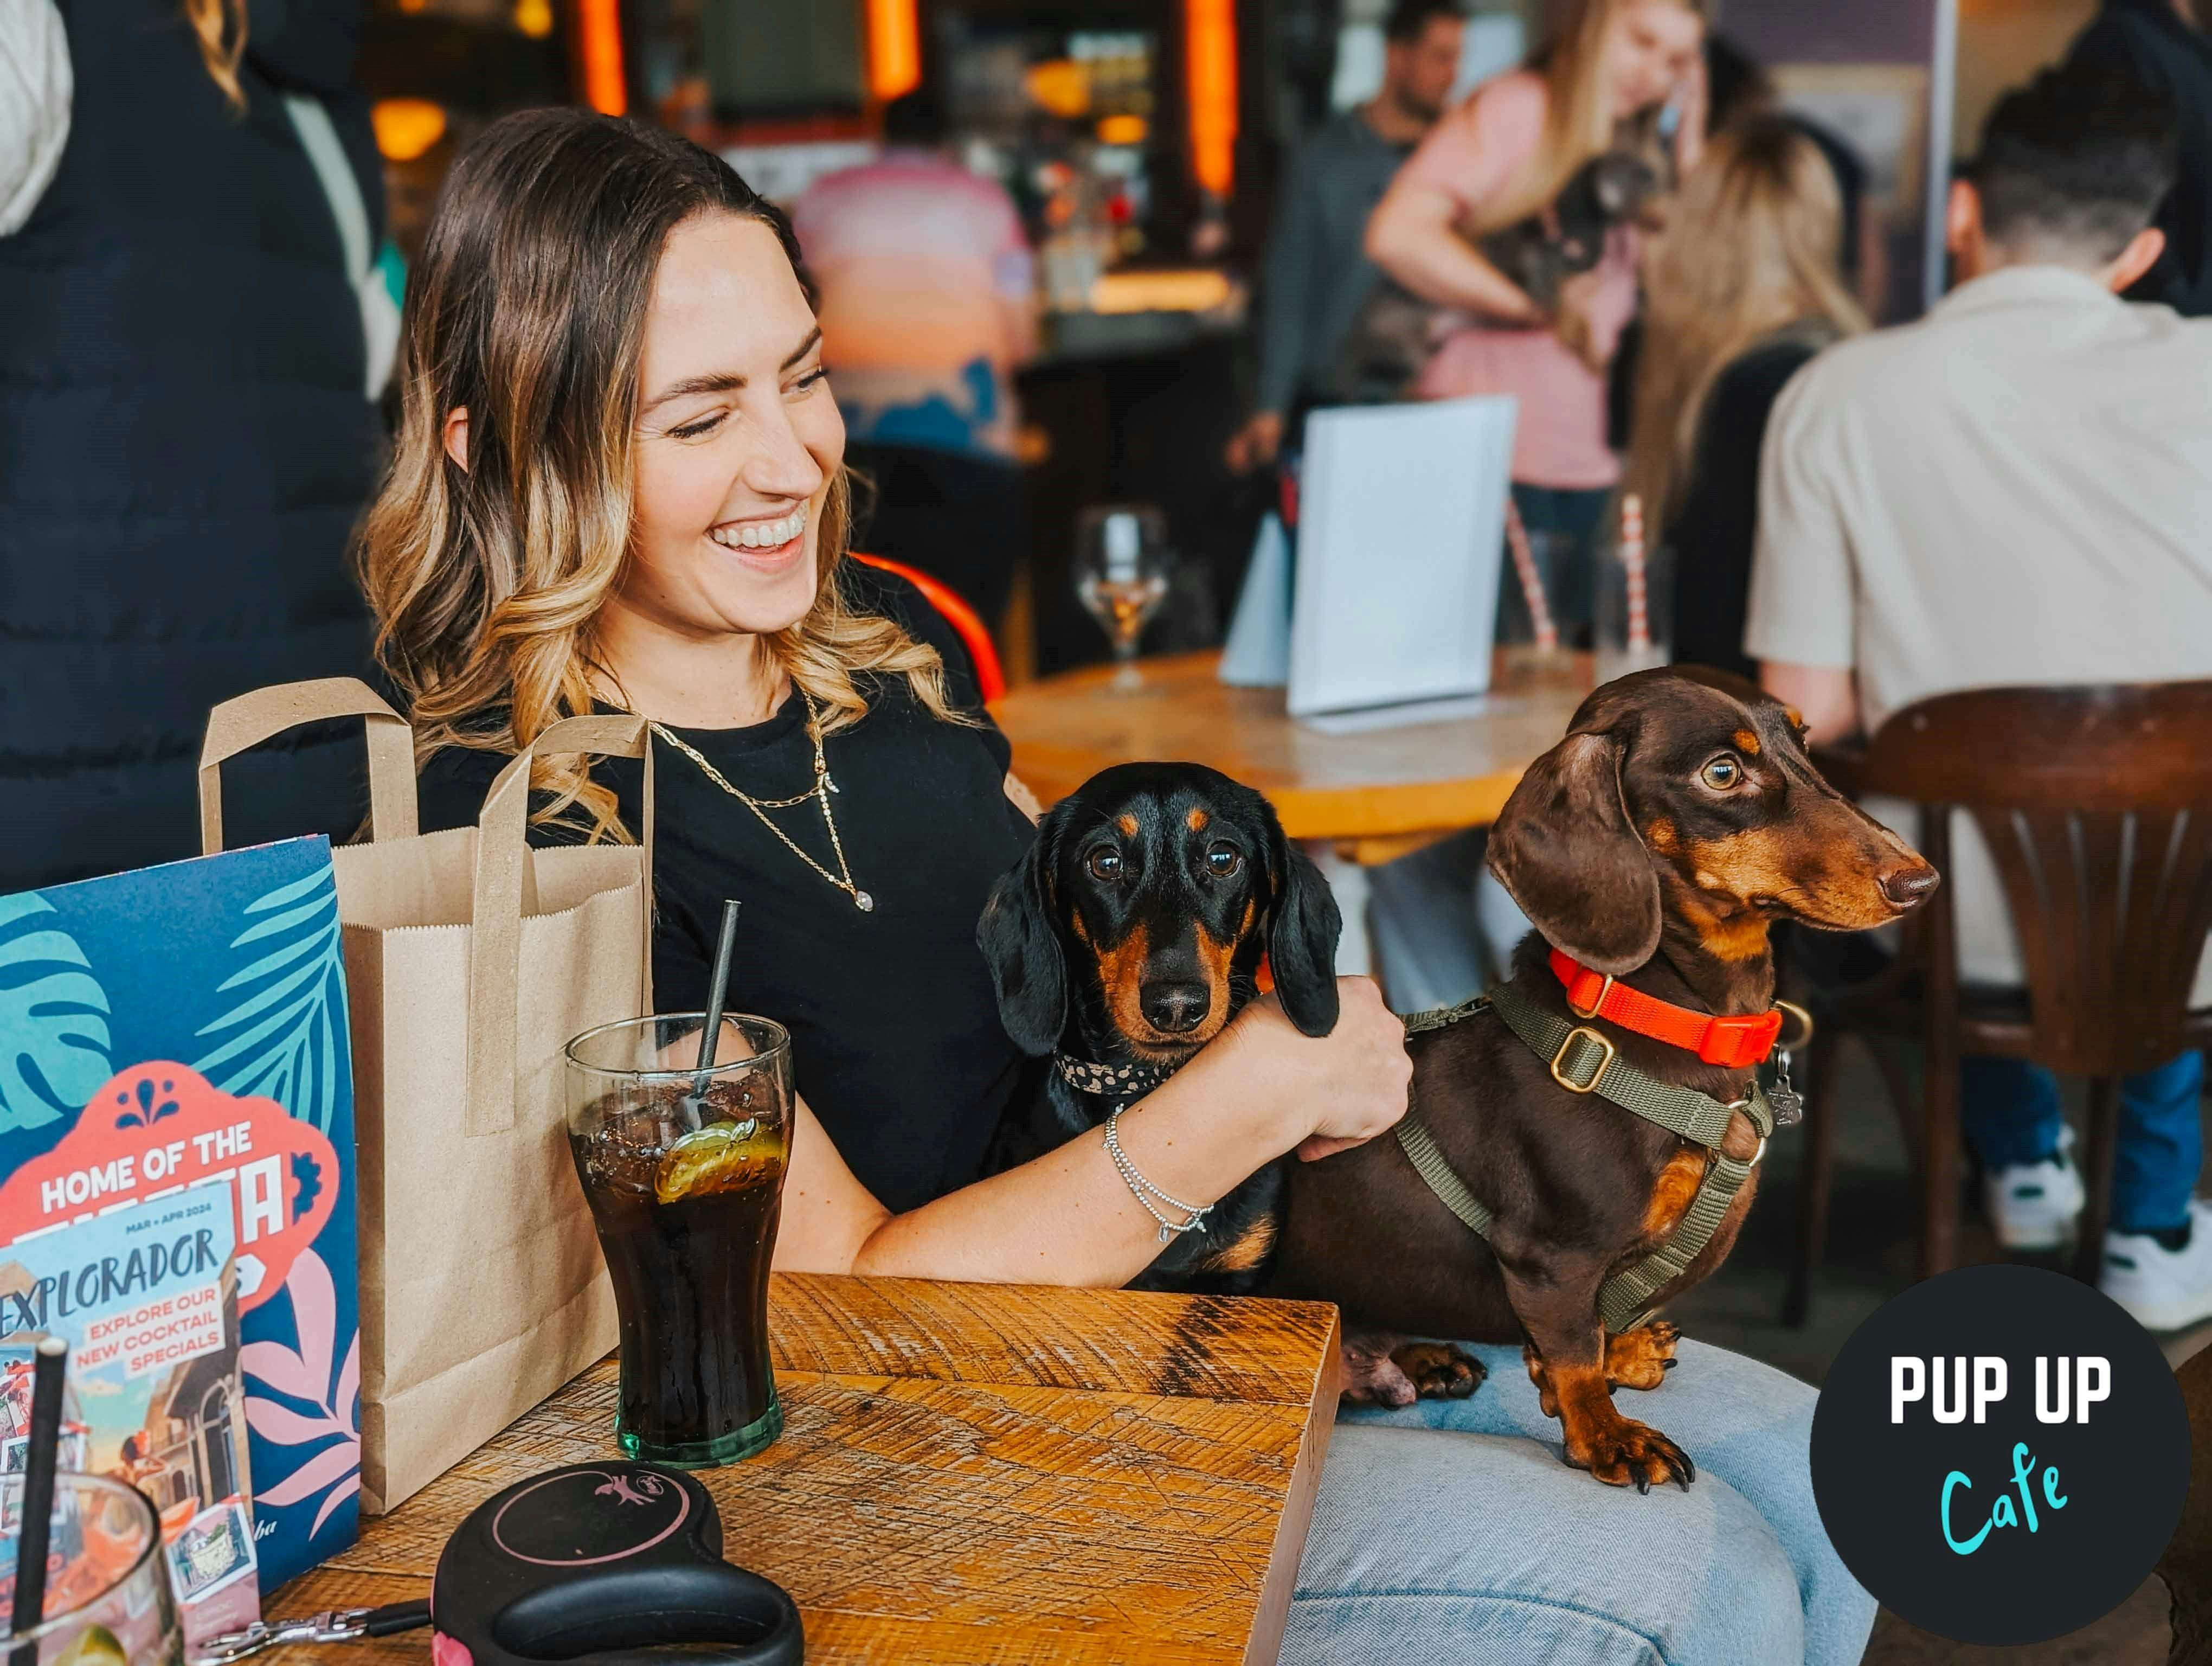 A Dachshund pop-up cafe is coming to Glasgow next month